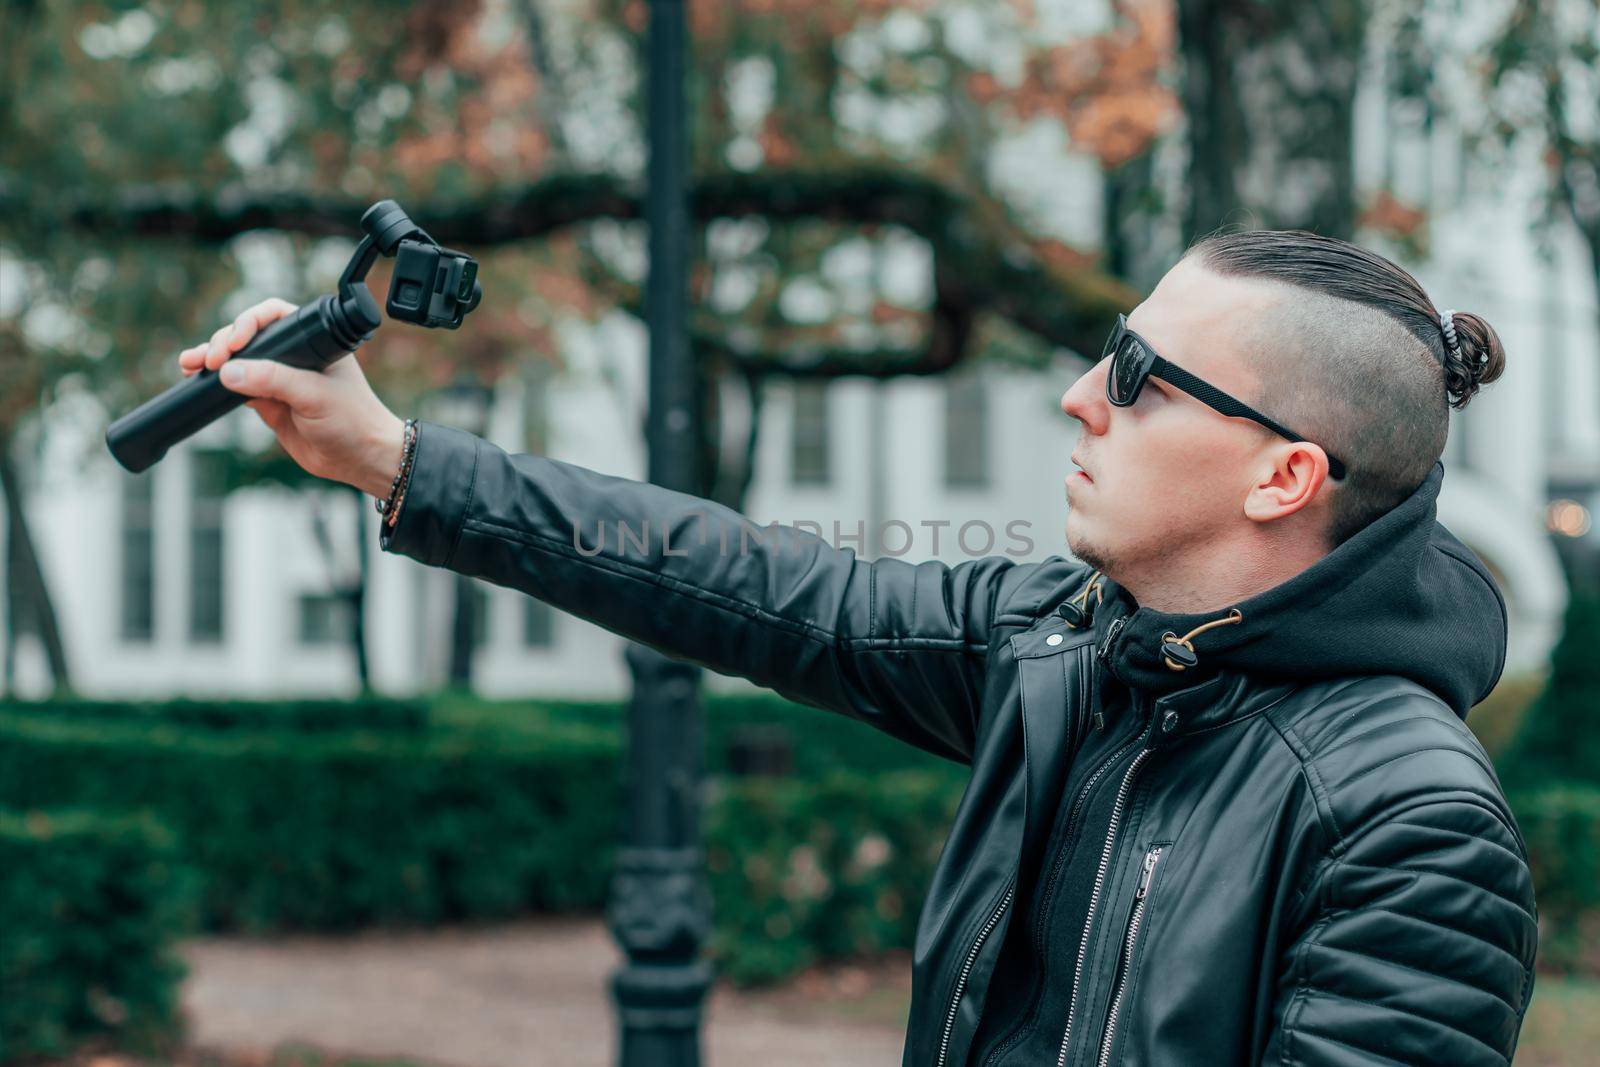 Blogger in Sunglasses Making Selfie or Streaming Video at the Autumn Park Using Action Camera with Gimbal Camera Stabilizer. Handsome Man in Black Clothes Making Photo